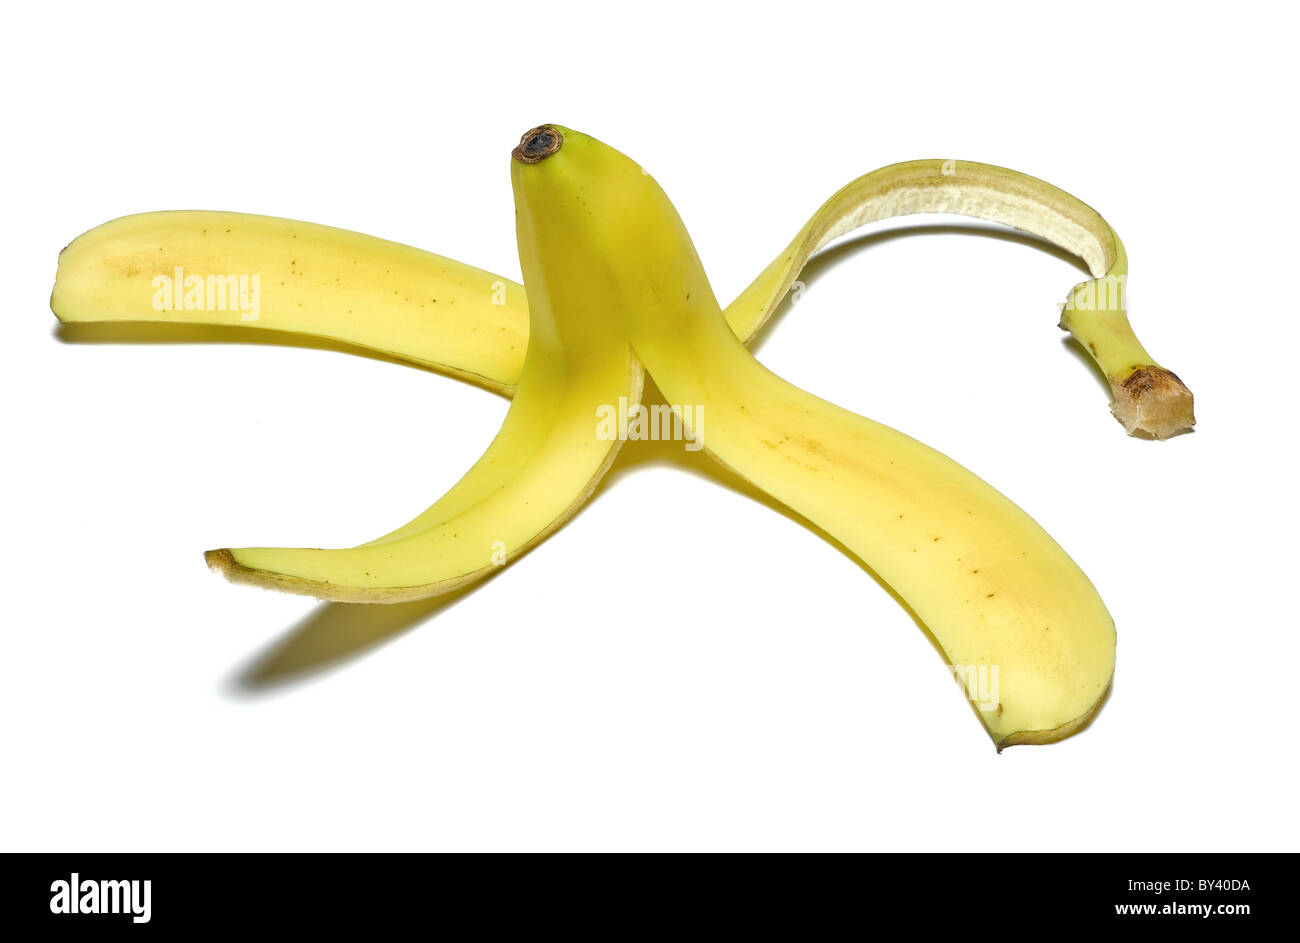 Slipping And Banana Skin High Resolution Stock Photography and Images -  Alamy